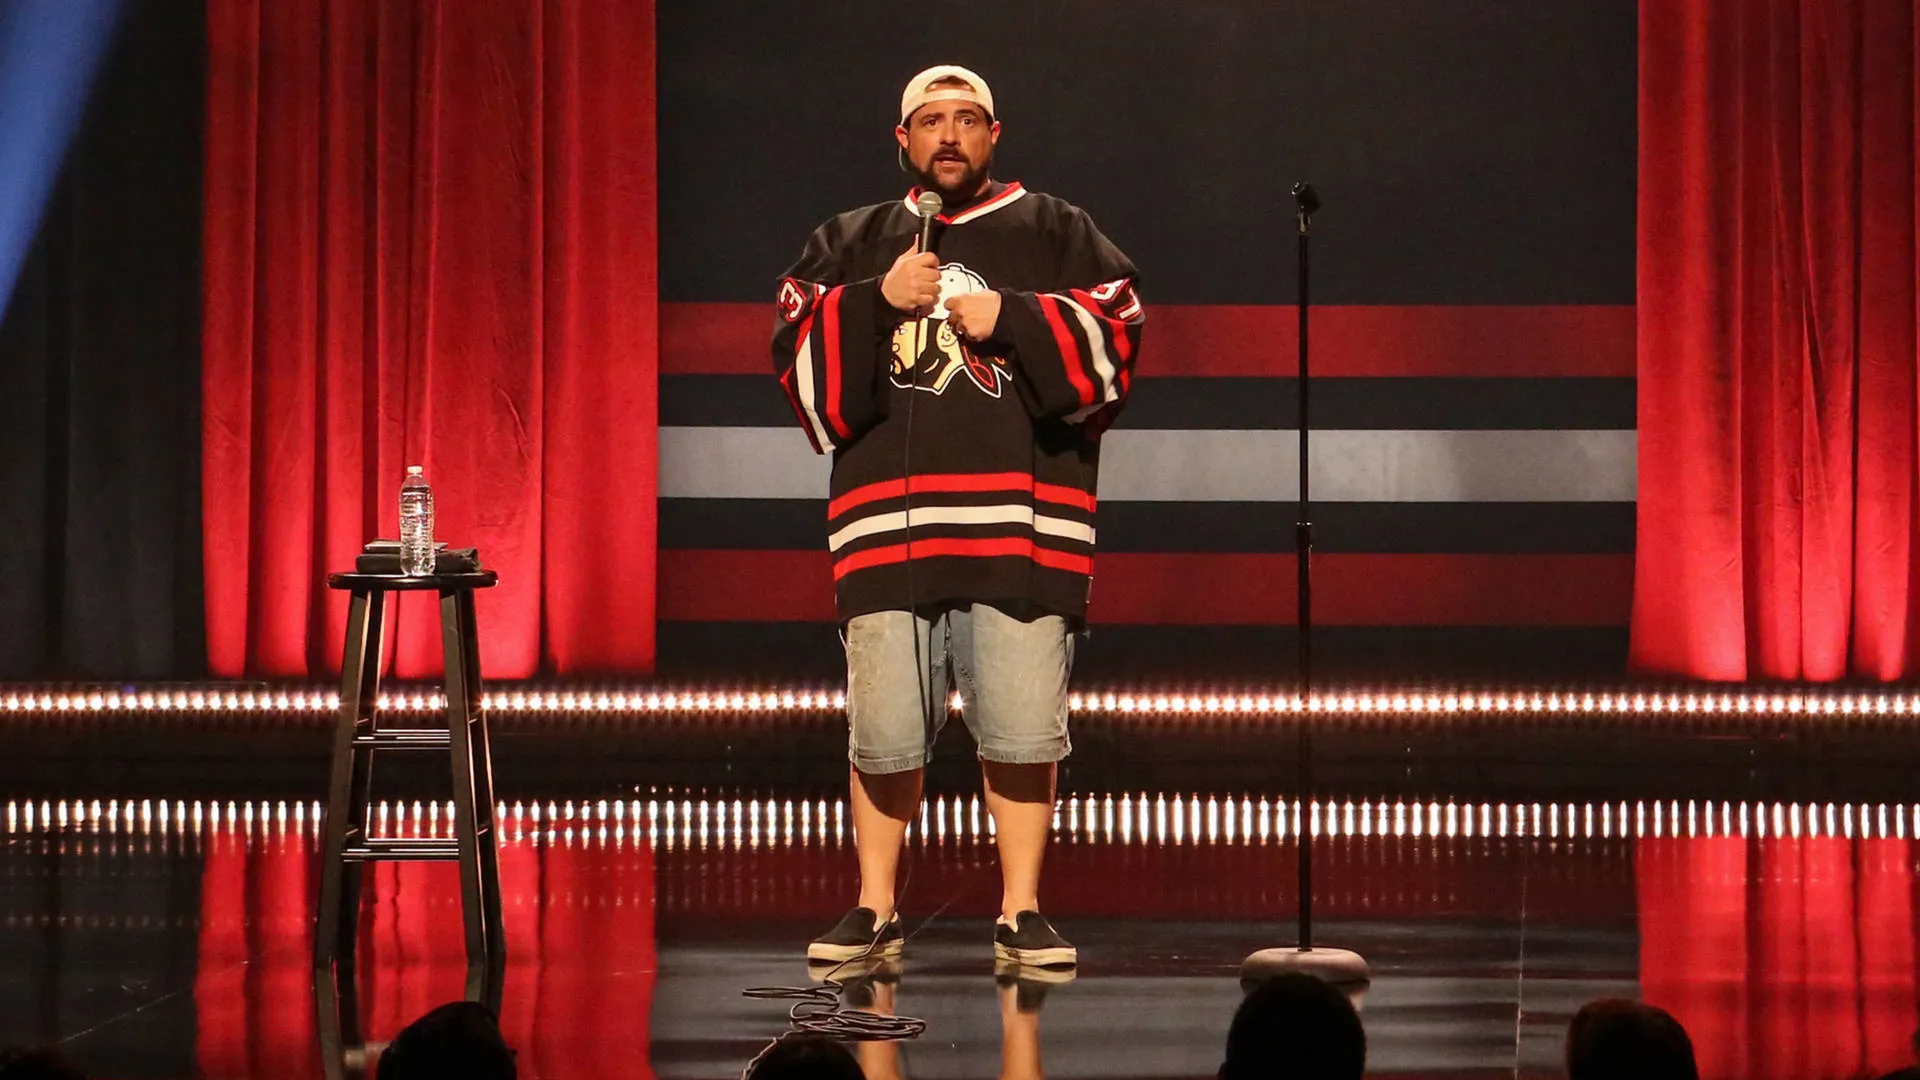 Kevin Smith: Silent But Deadly